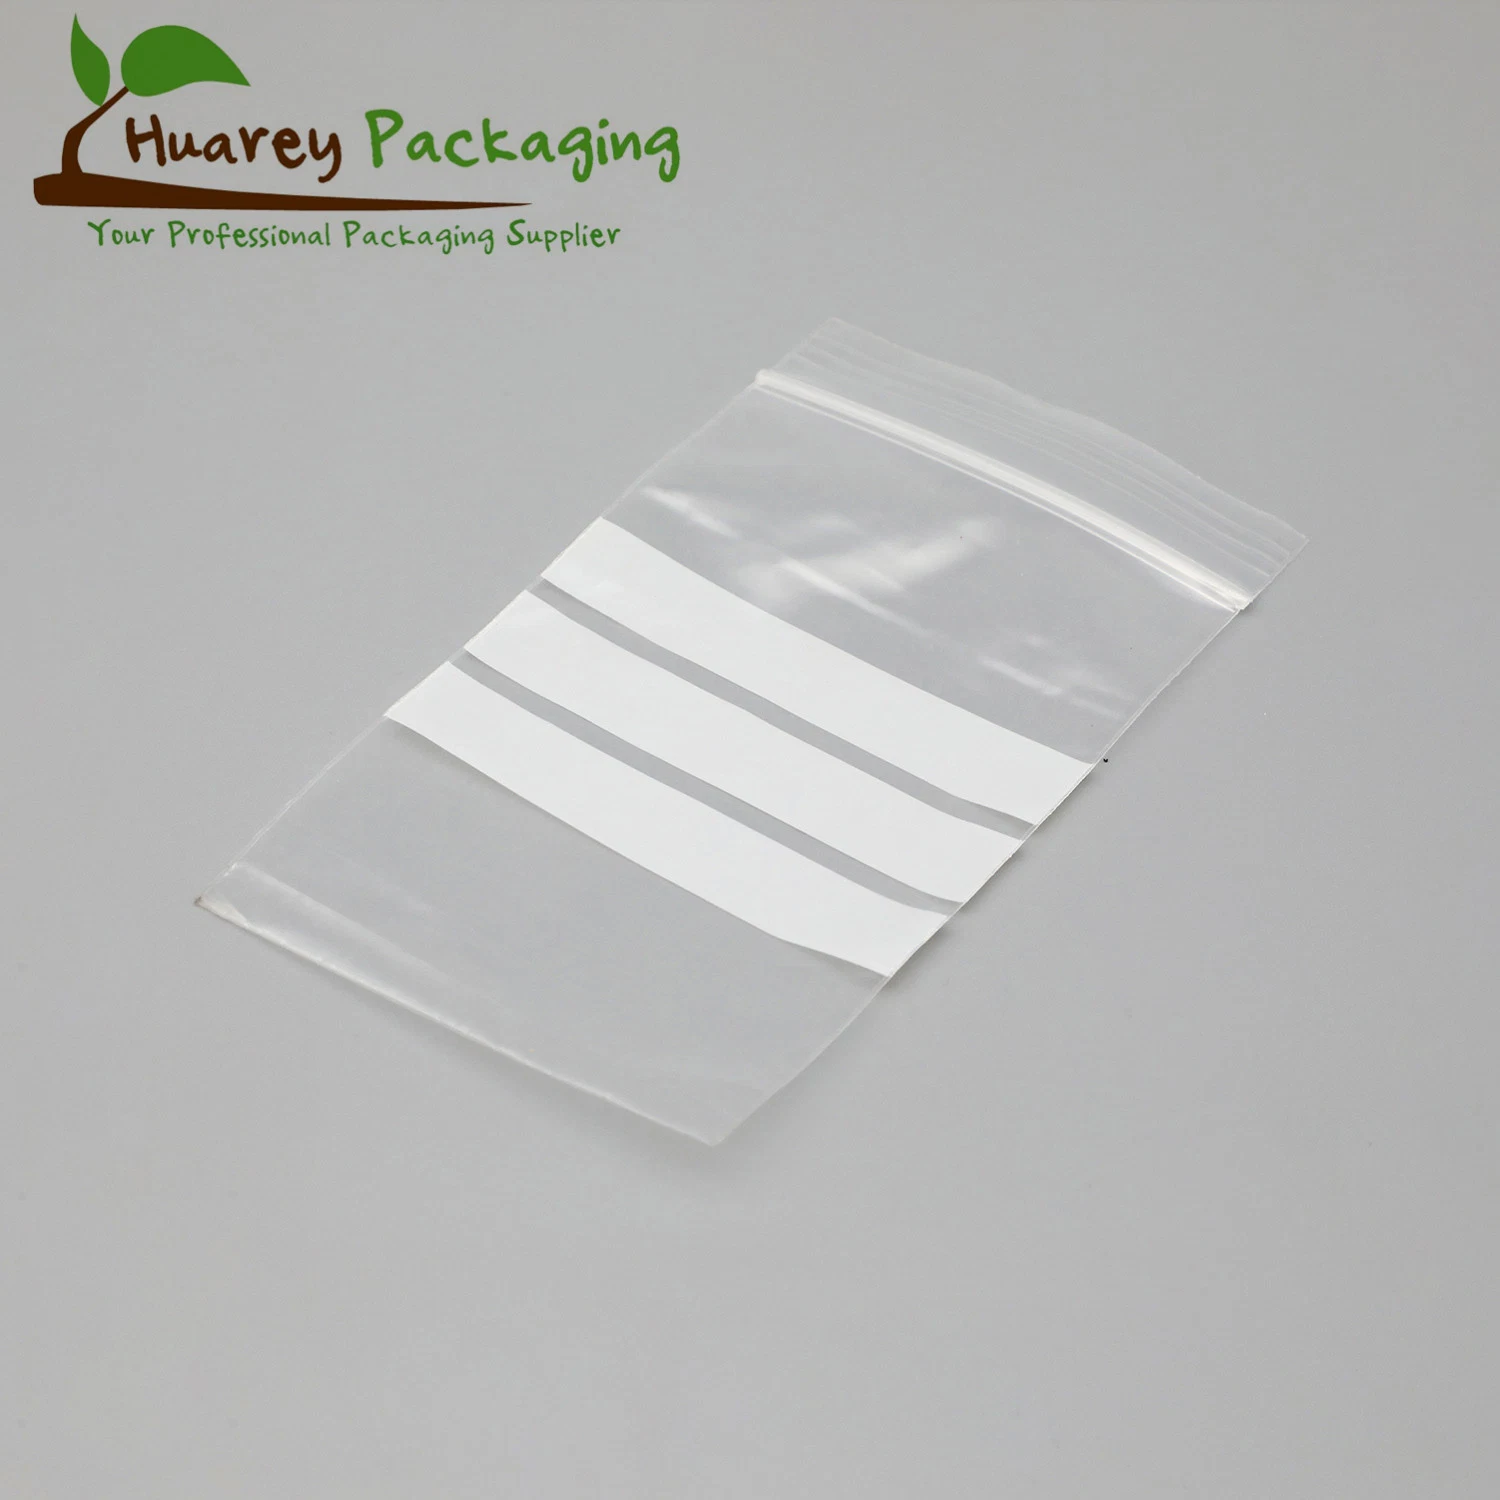 Reclosable Storage Packing Clear Transparent LDPE/ PE Plastic Zipper Bag with Writable White Stripes